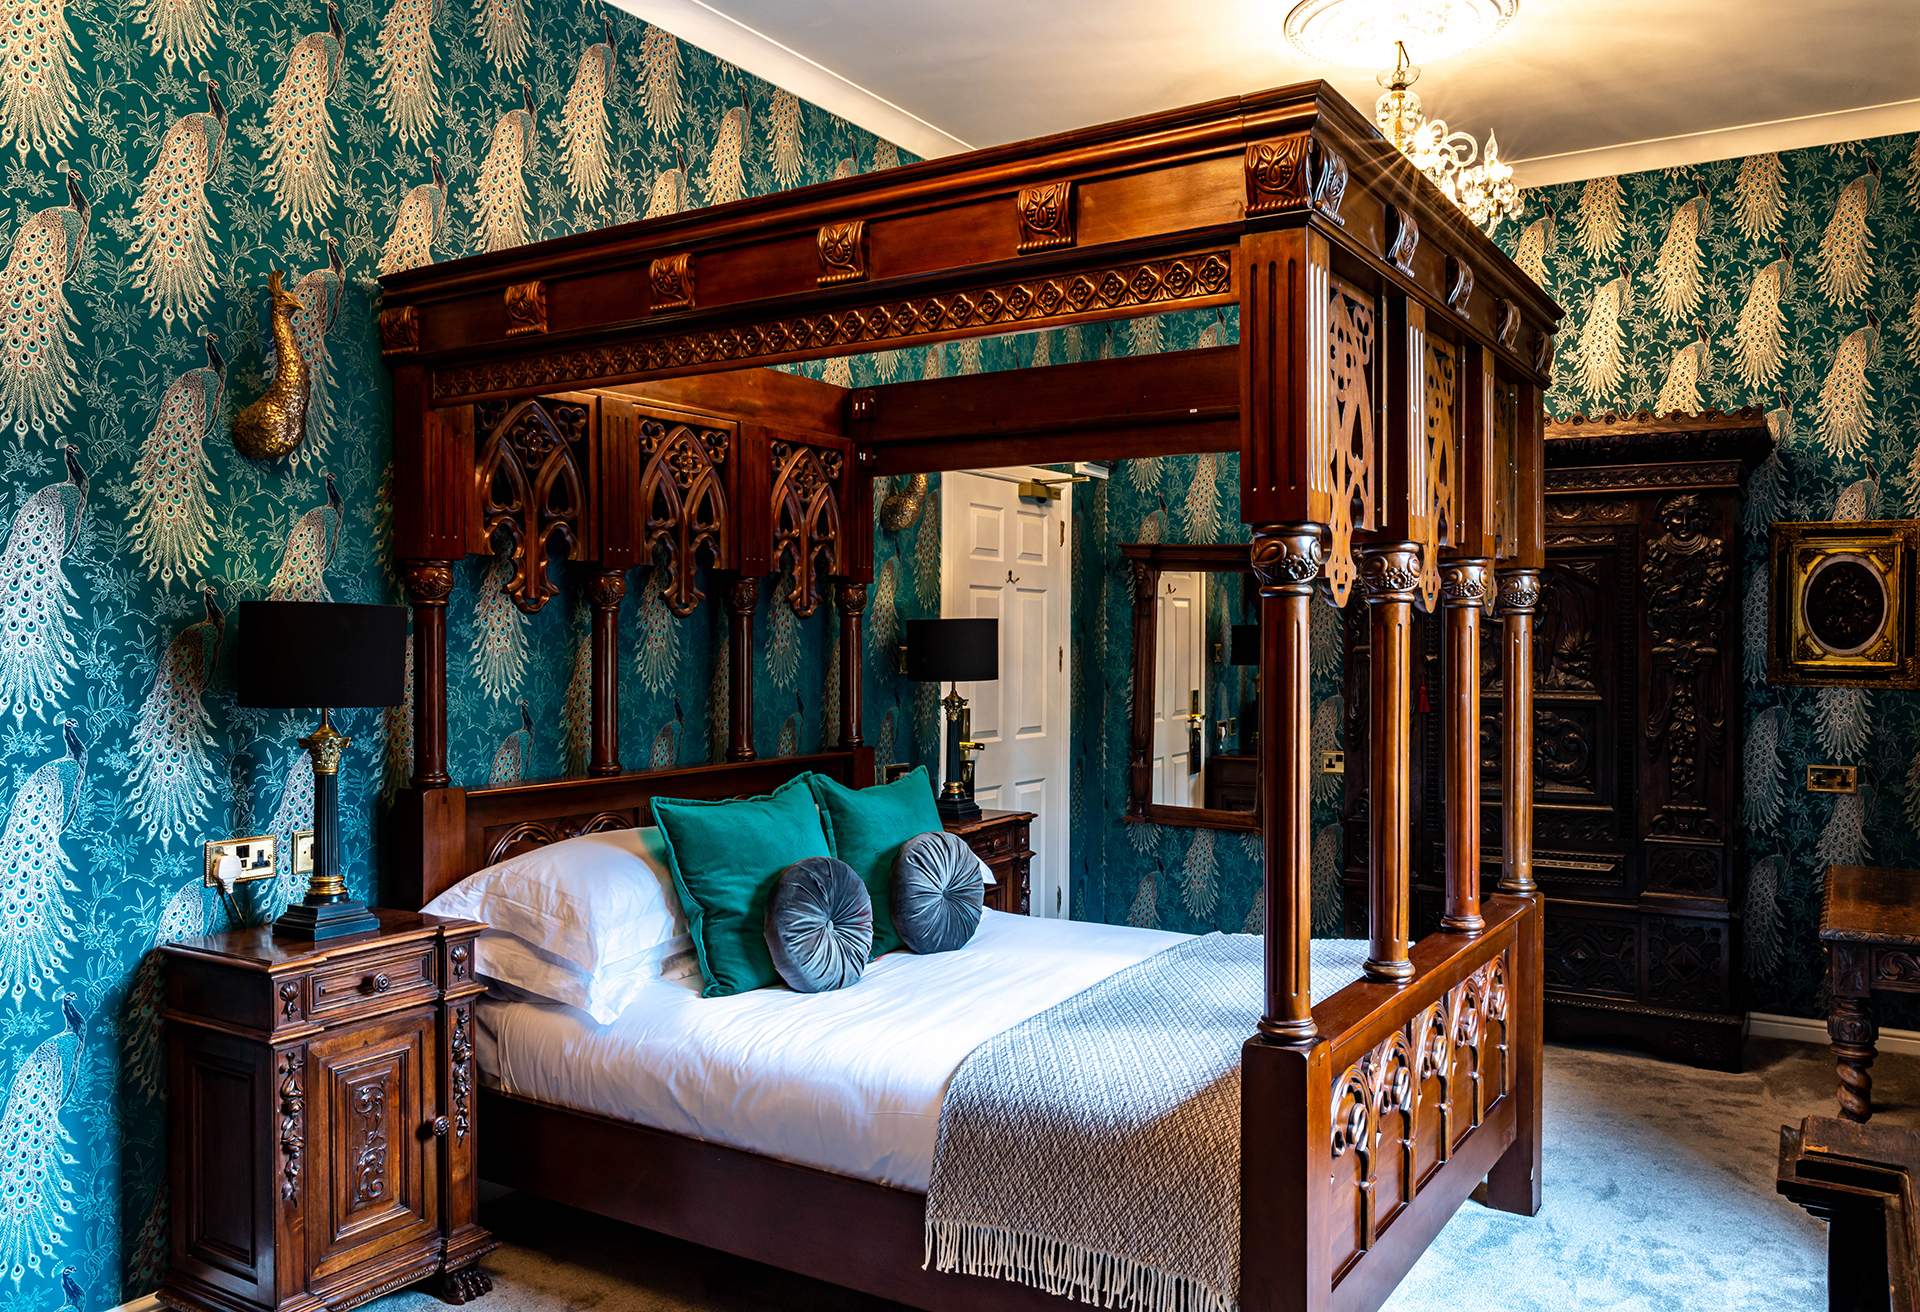 Bedroom of Melville Castle with four poster bed